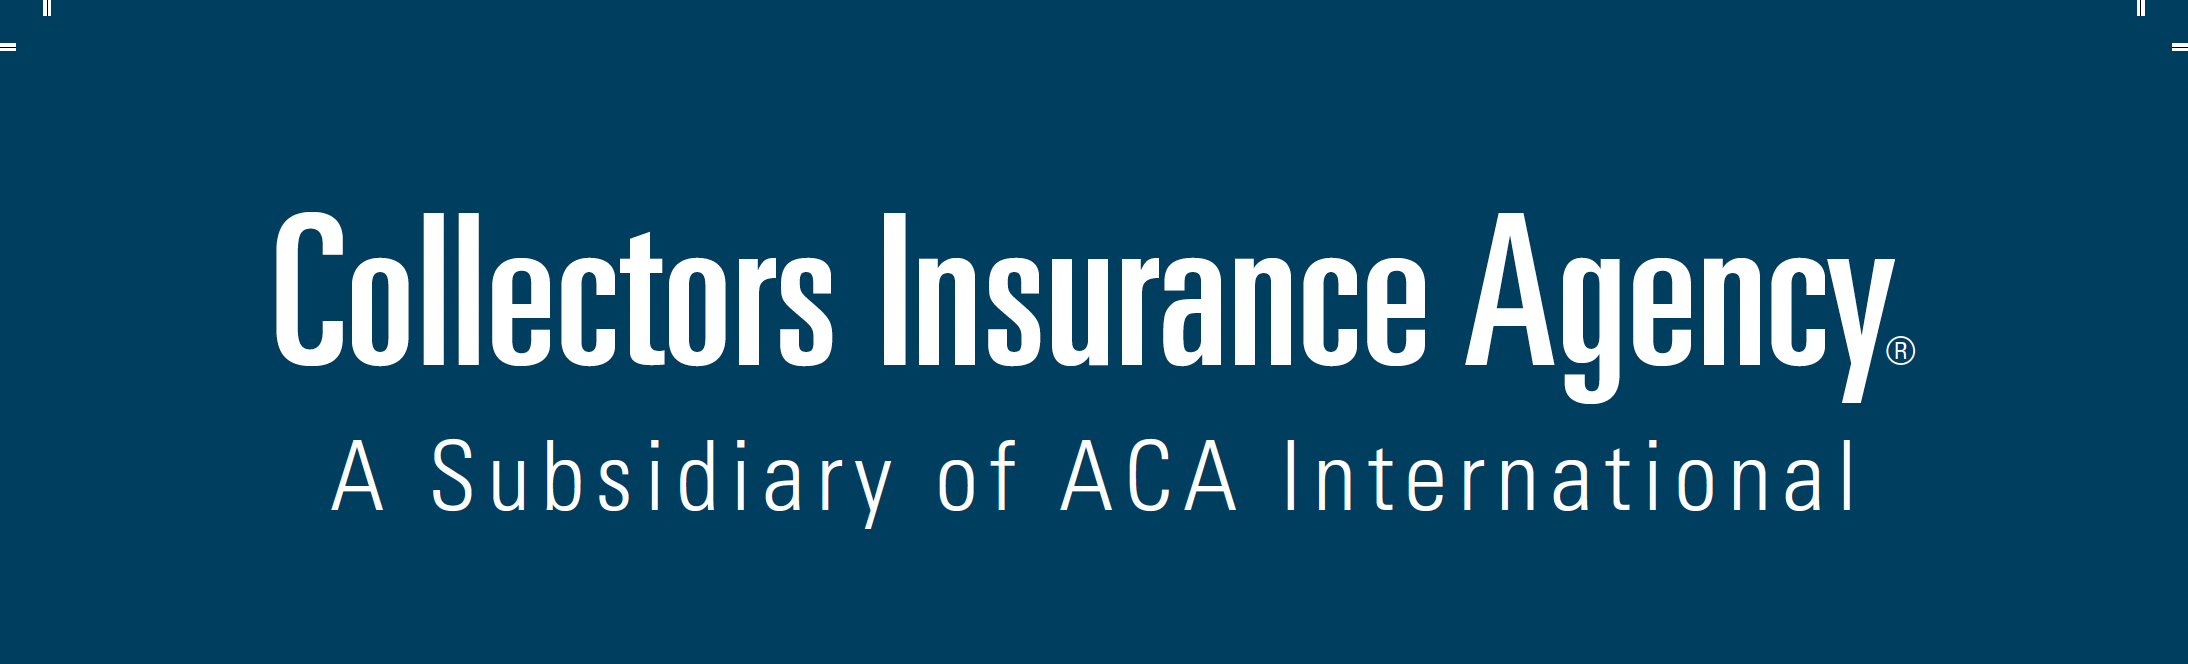 Collectors Insurance Agency